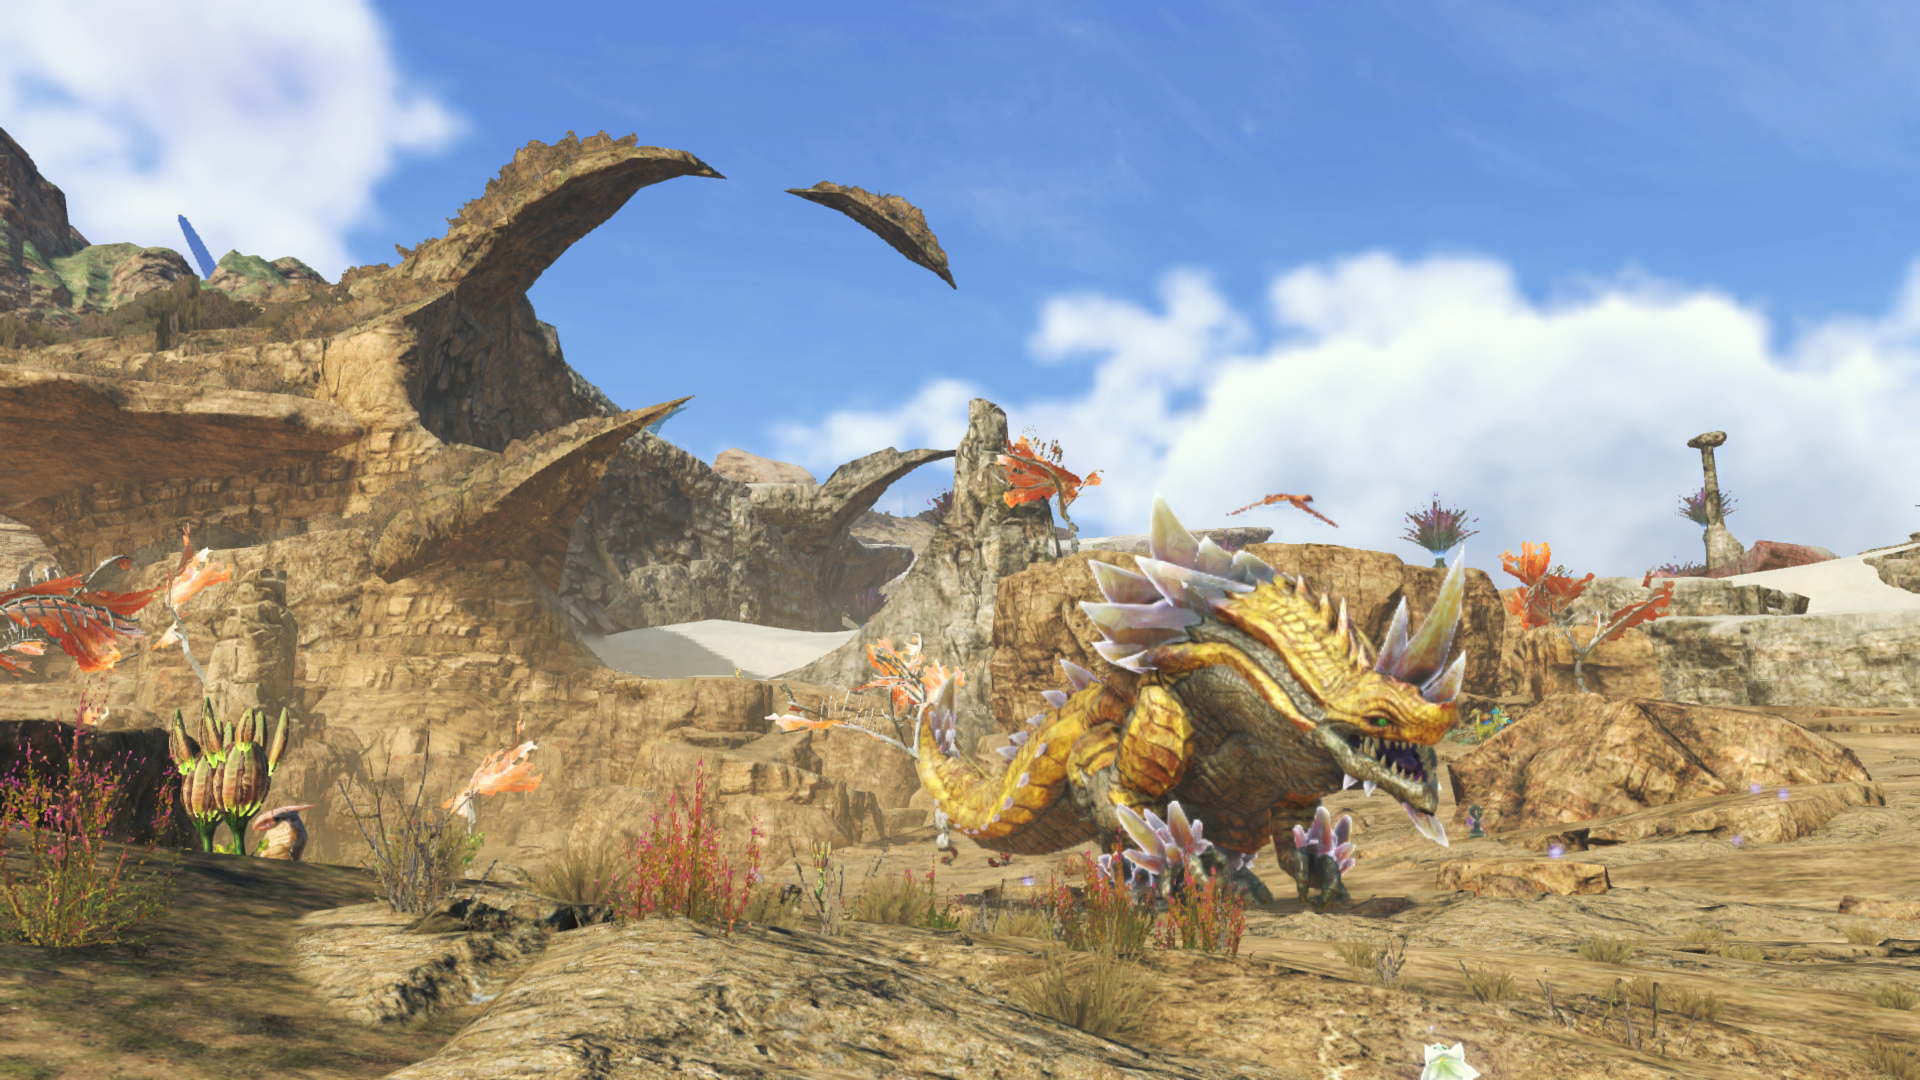 Xenoblade Chronicles 3 Gets Additional Combat Details - RPGamer